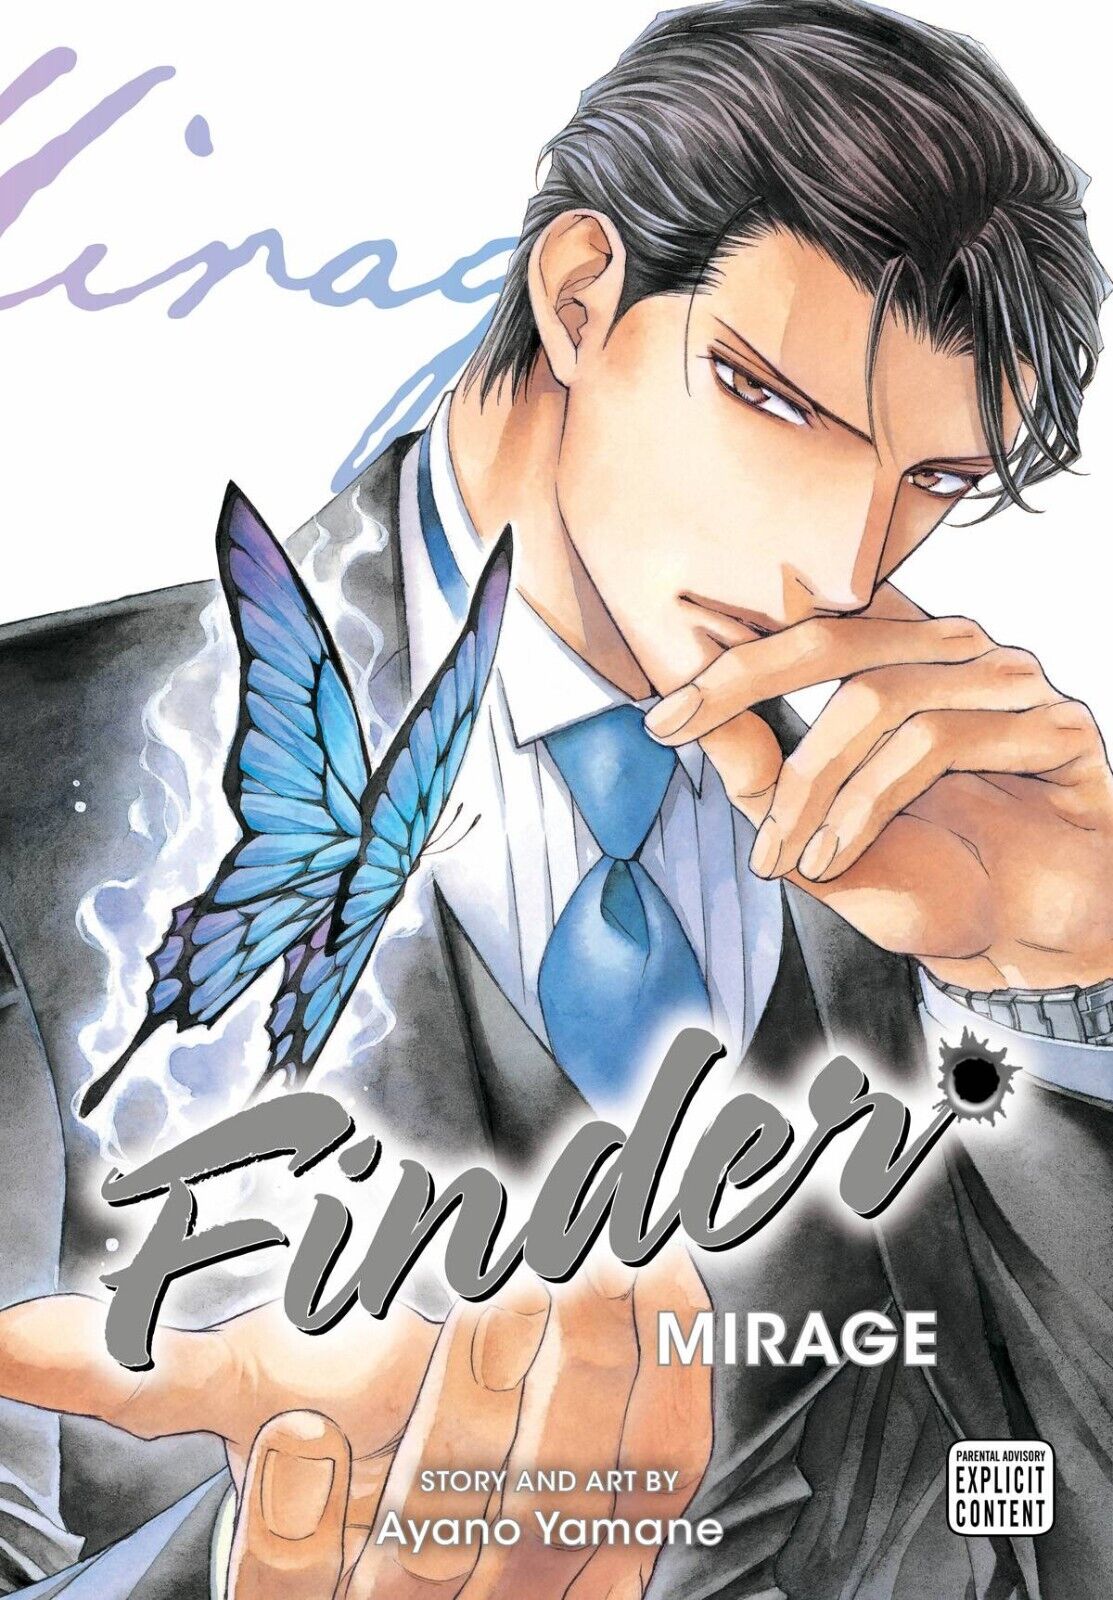 Finder vol. 13: Mirage by Ayano Yamane / NEW Yaoi manga from Sublime